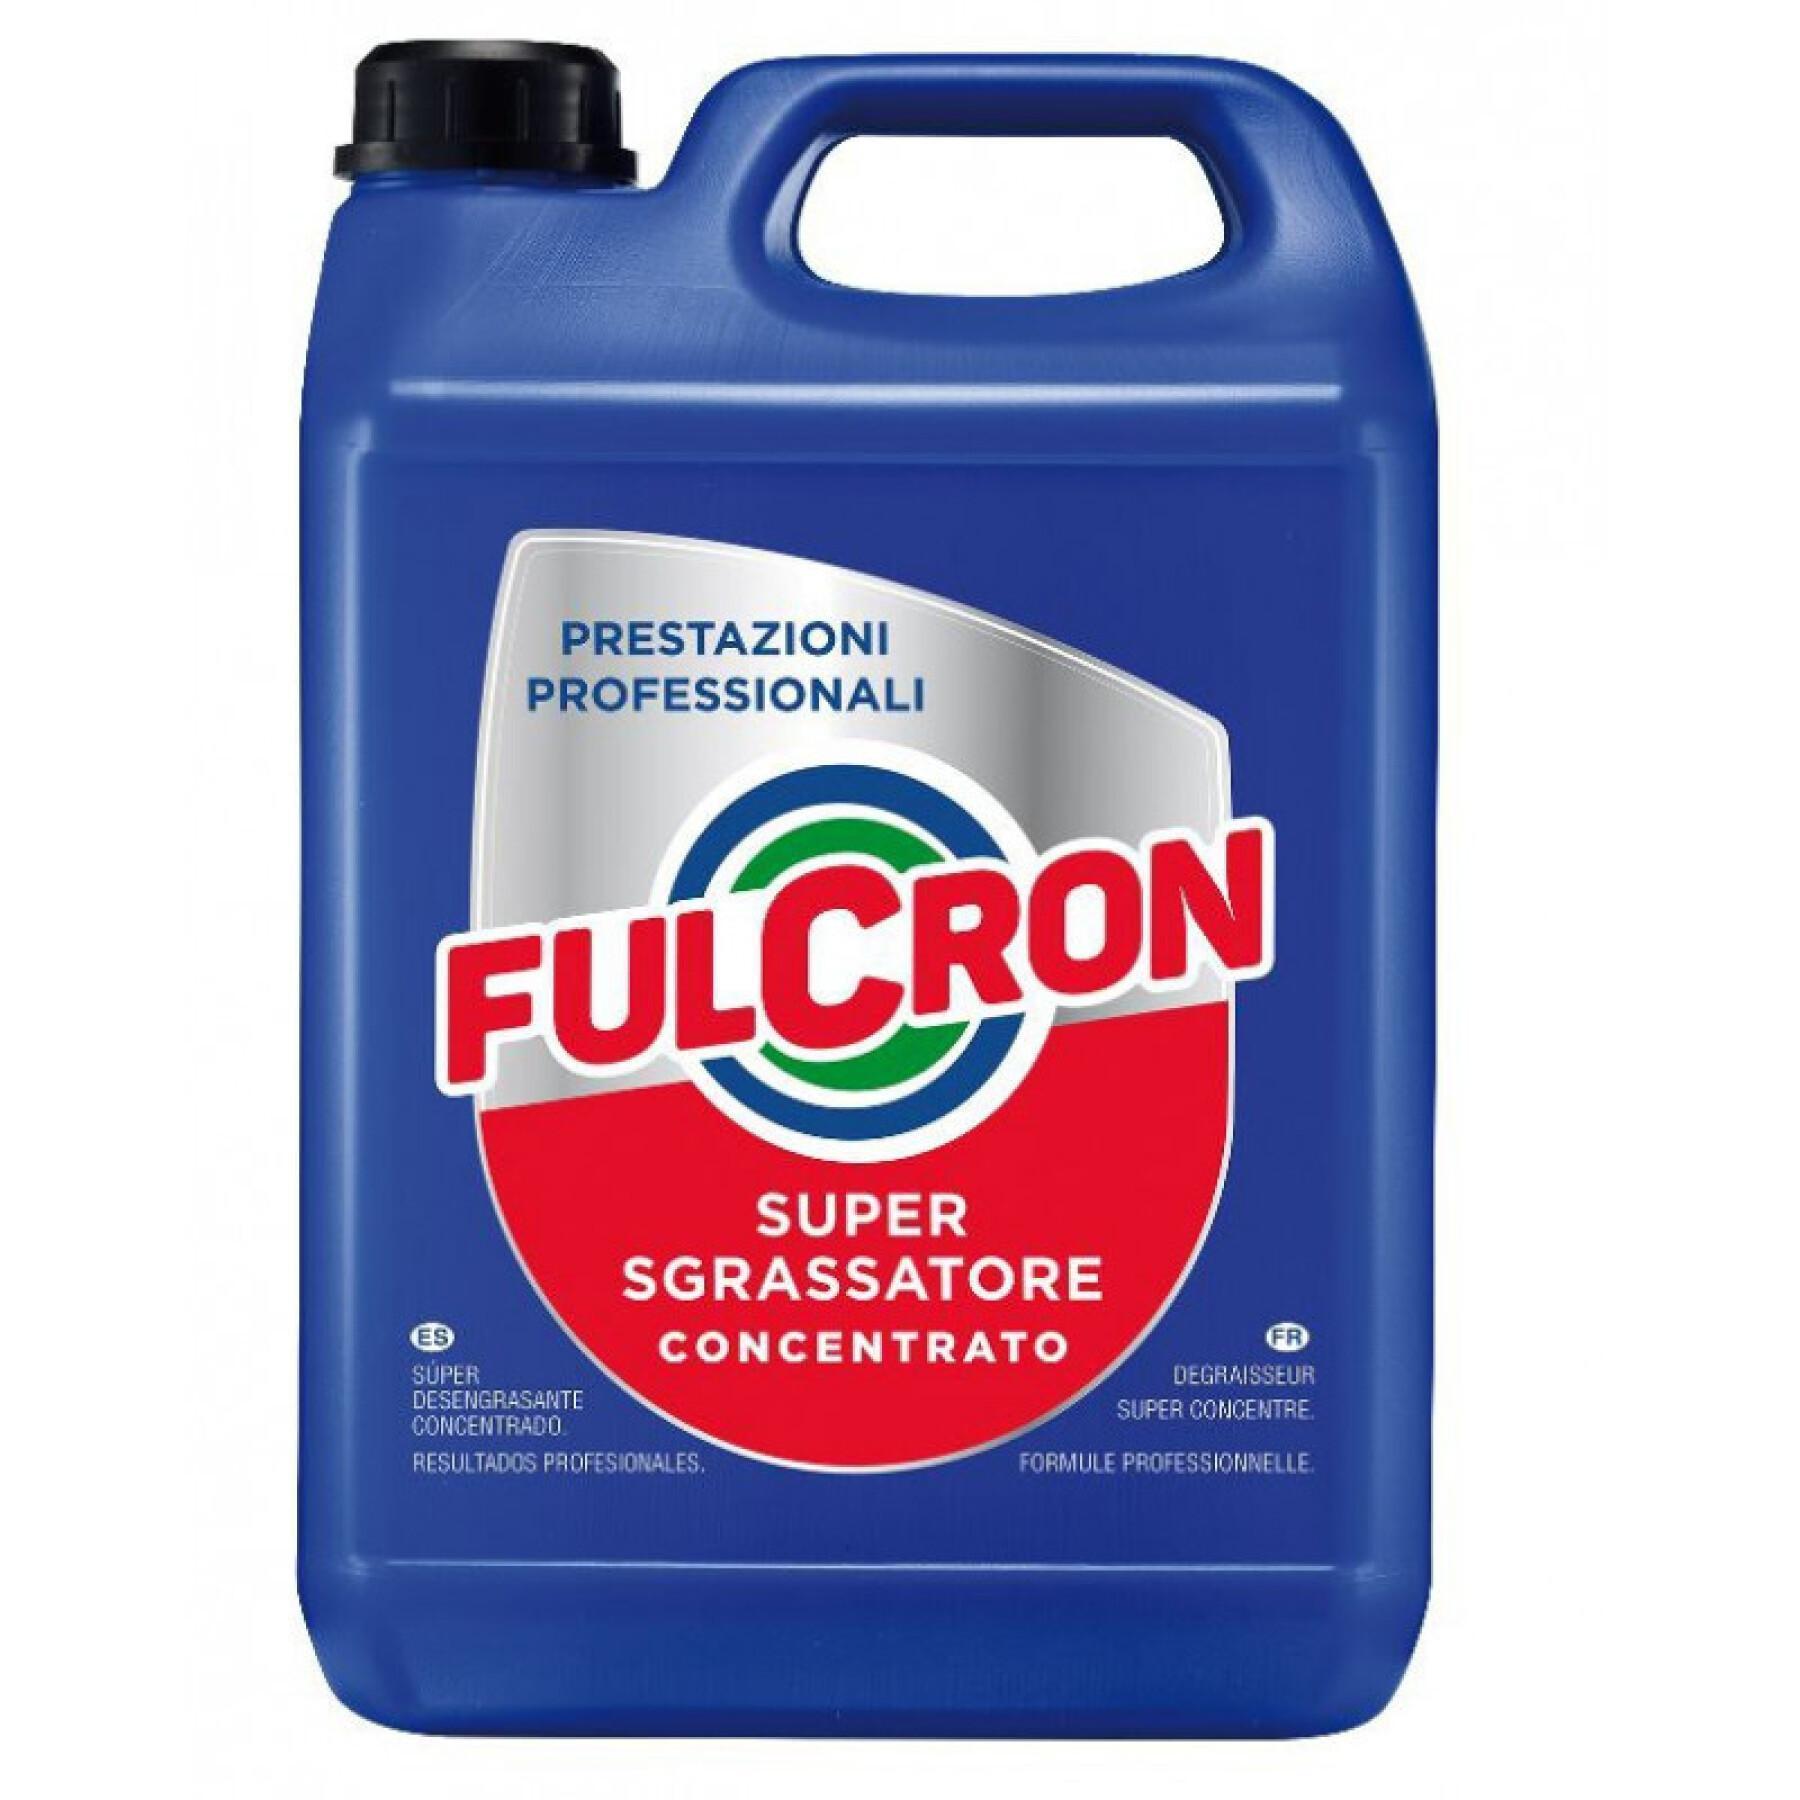 Non-toxic cleaner and degreaser Arexons 5L